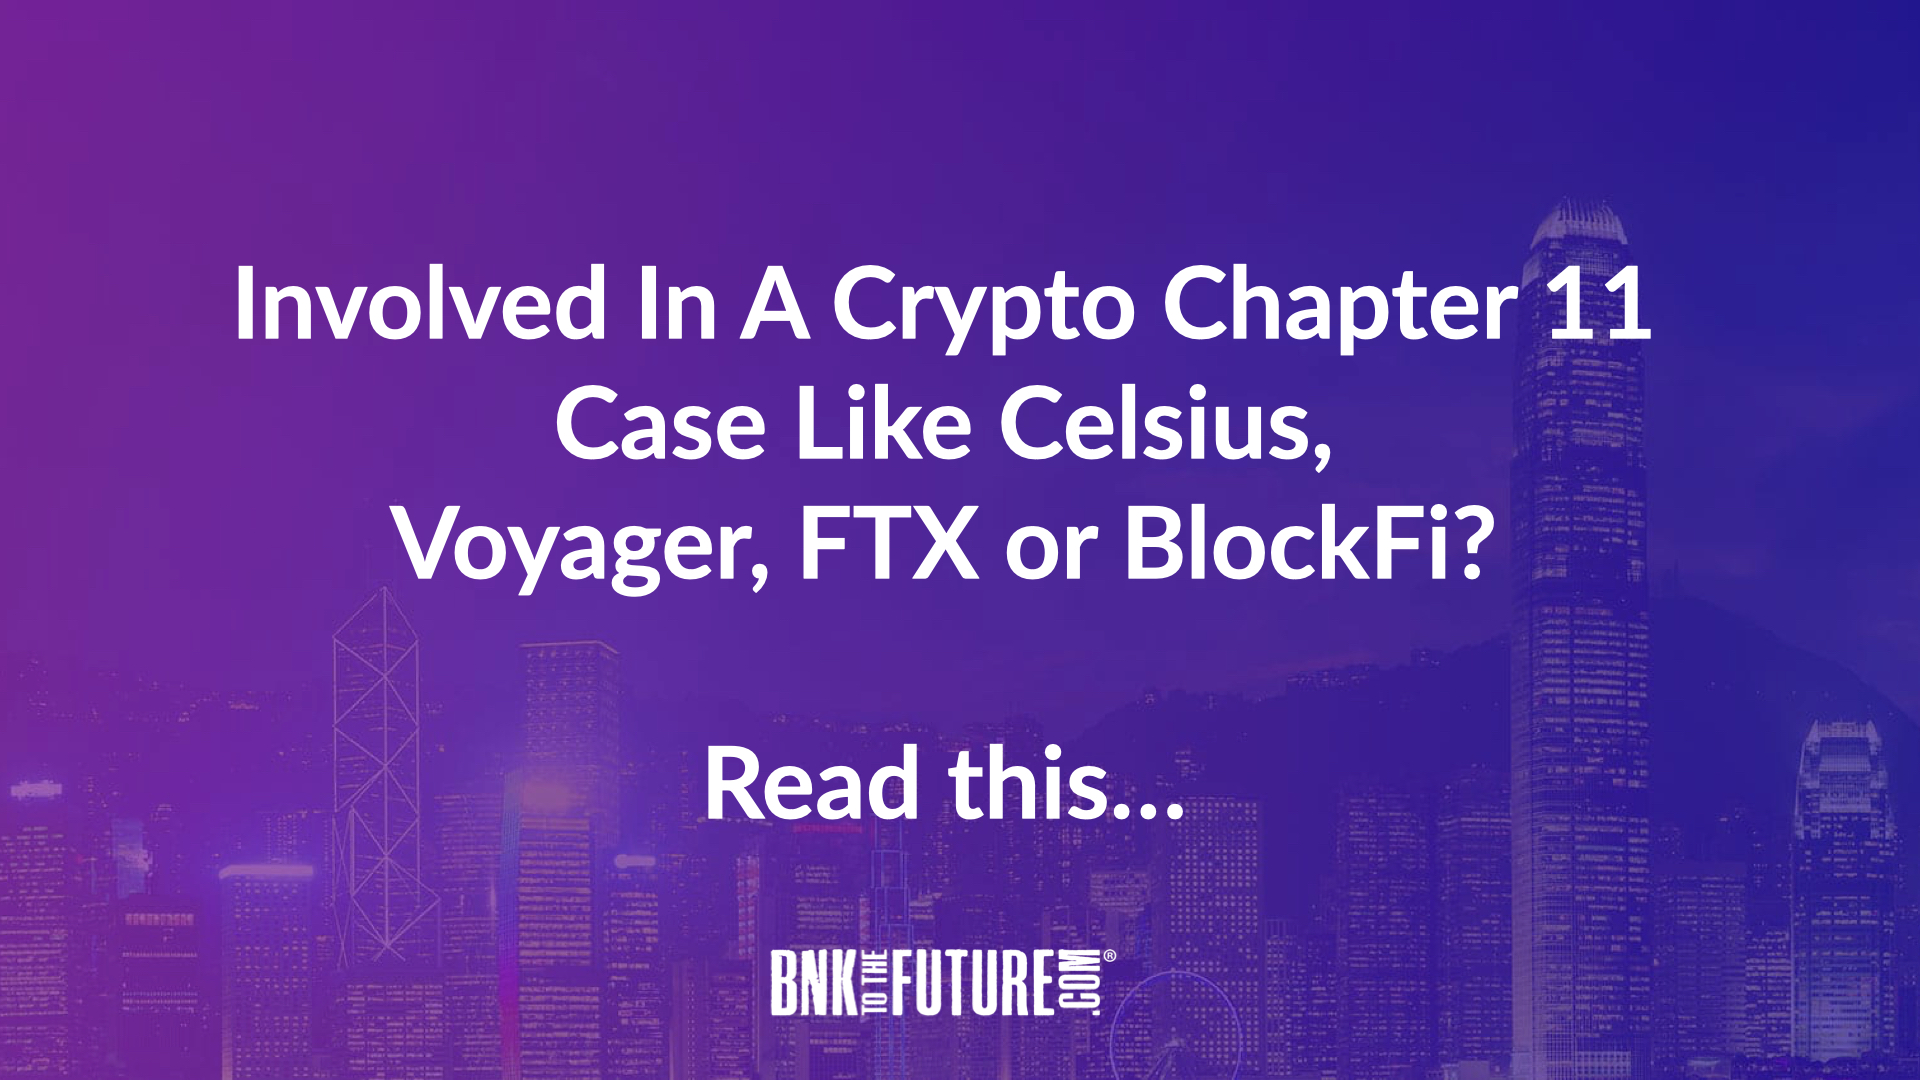 Involved In A Crypto Chapter 11 Case Like Celsius, Voyager, FTX or BlockFi? Read This…